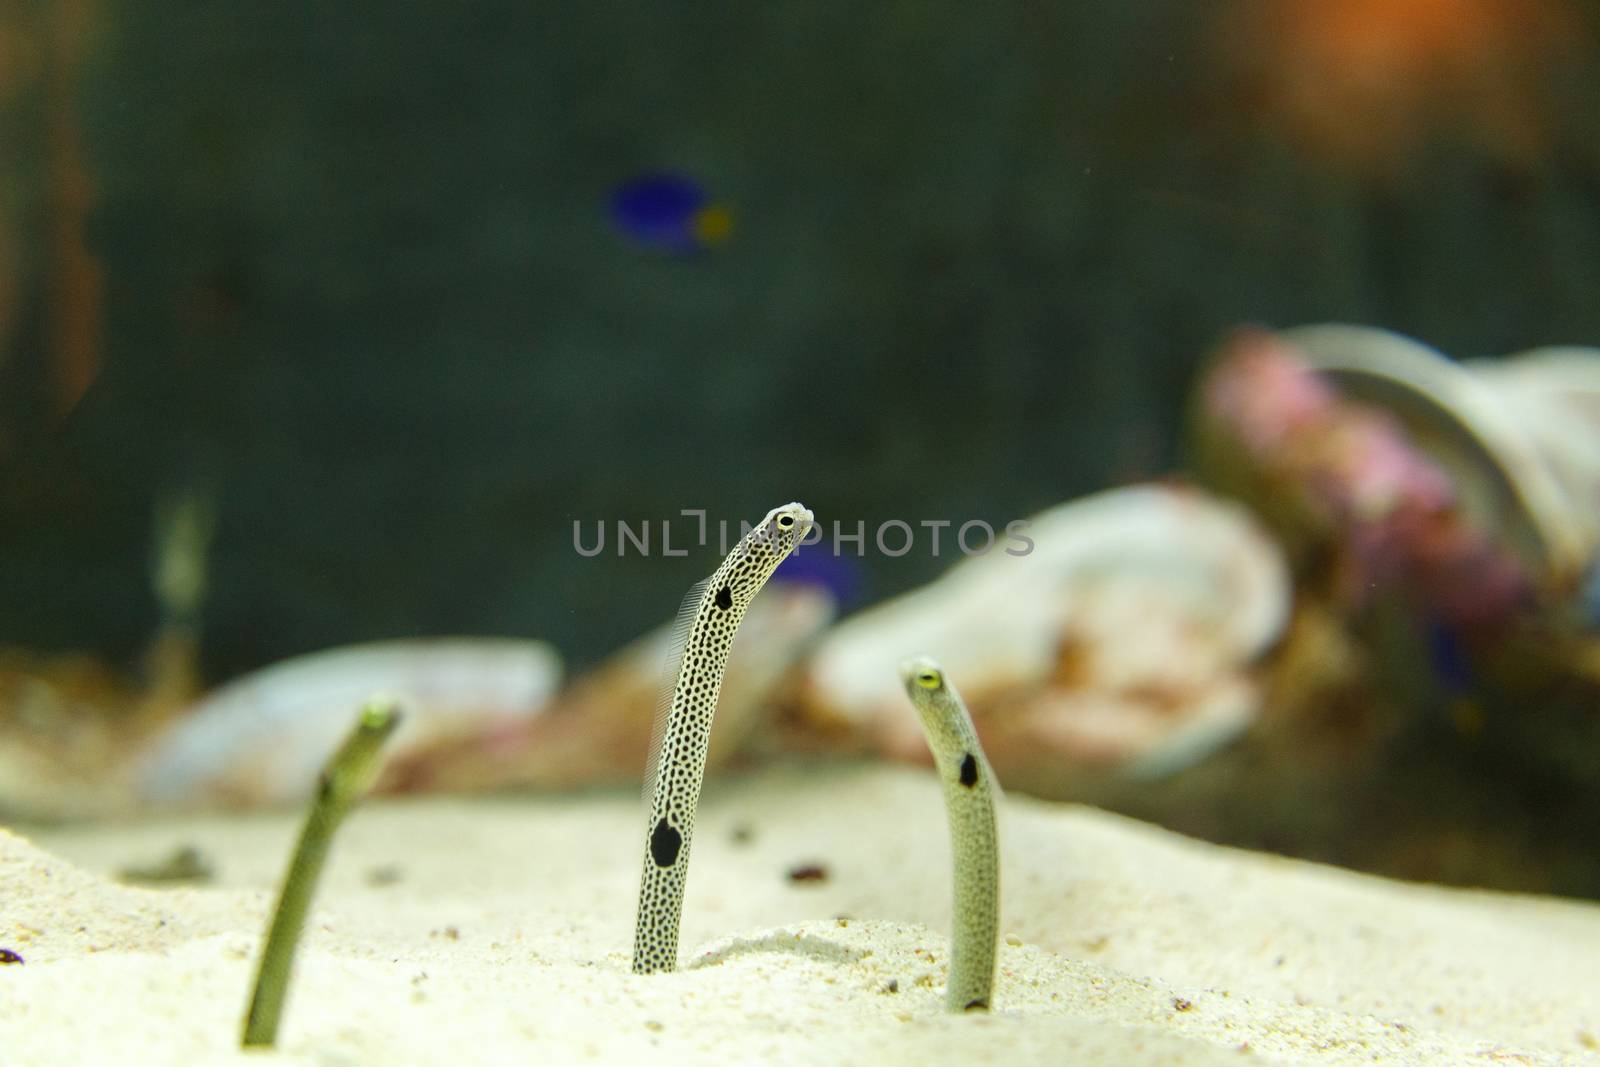 Spotted garden eel or Heteroconger hassi in aquarium in Dubai, UAE. They are showing their face from sand. by dugulan